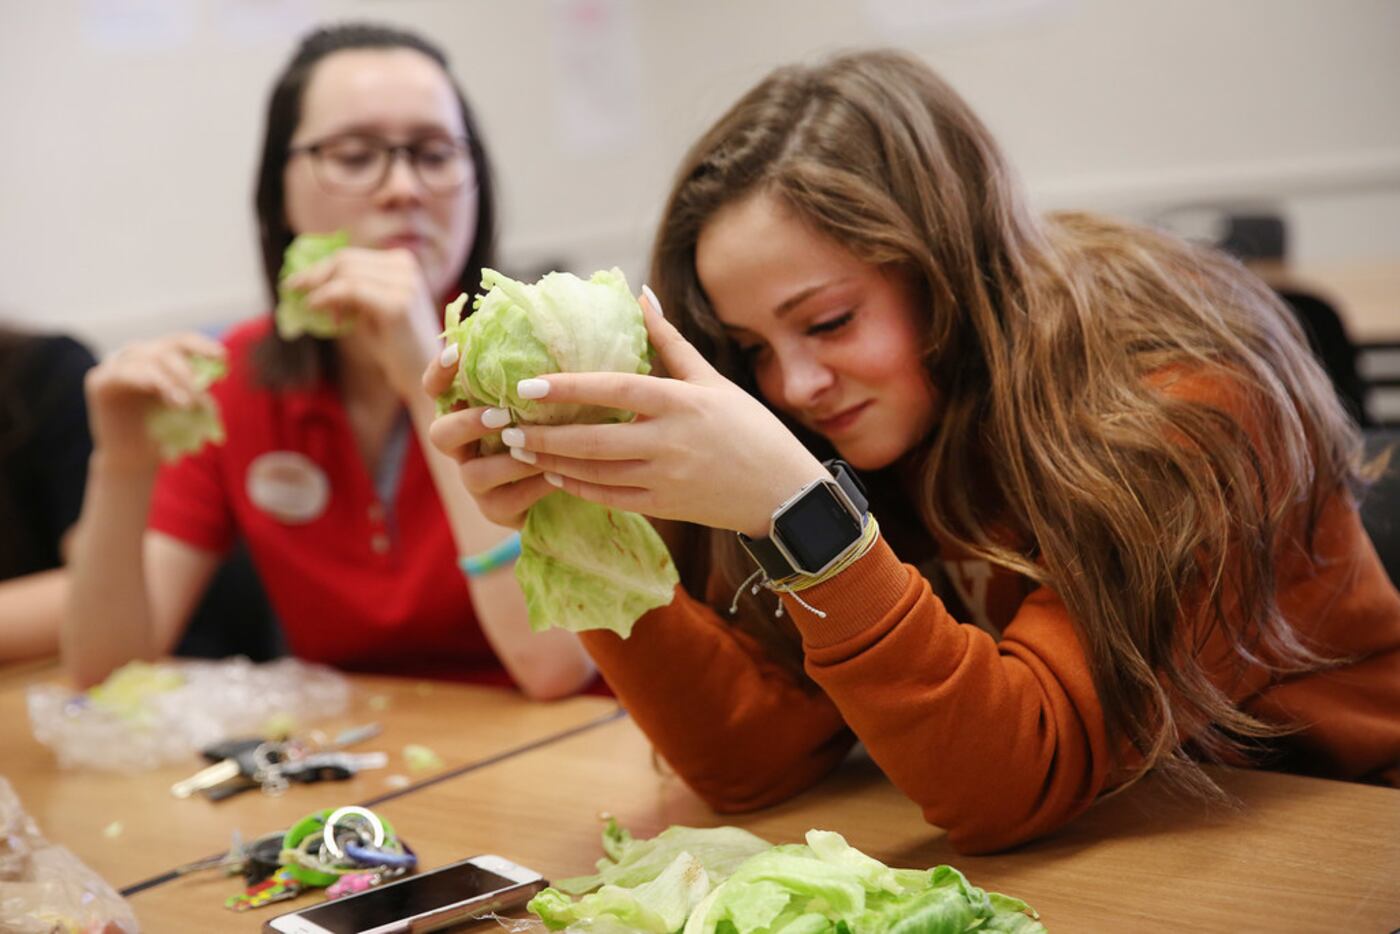 Senior Steph Halsey reacts while trying to eat a head of lettuce during a meeting of The...